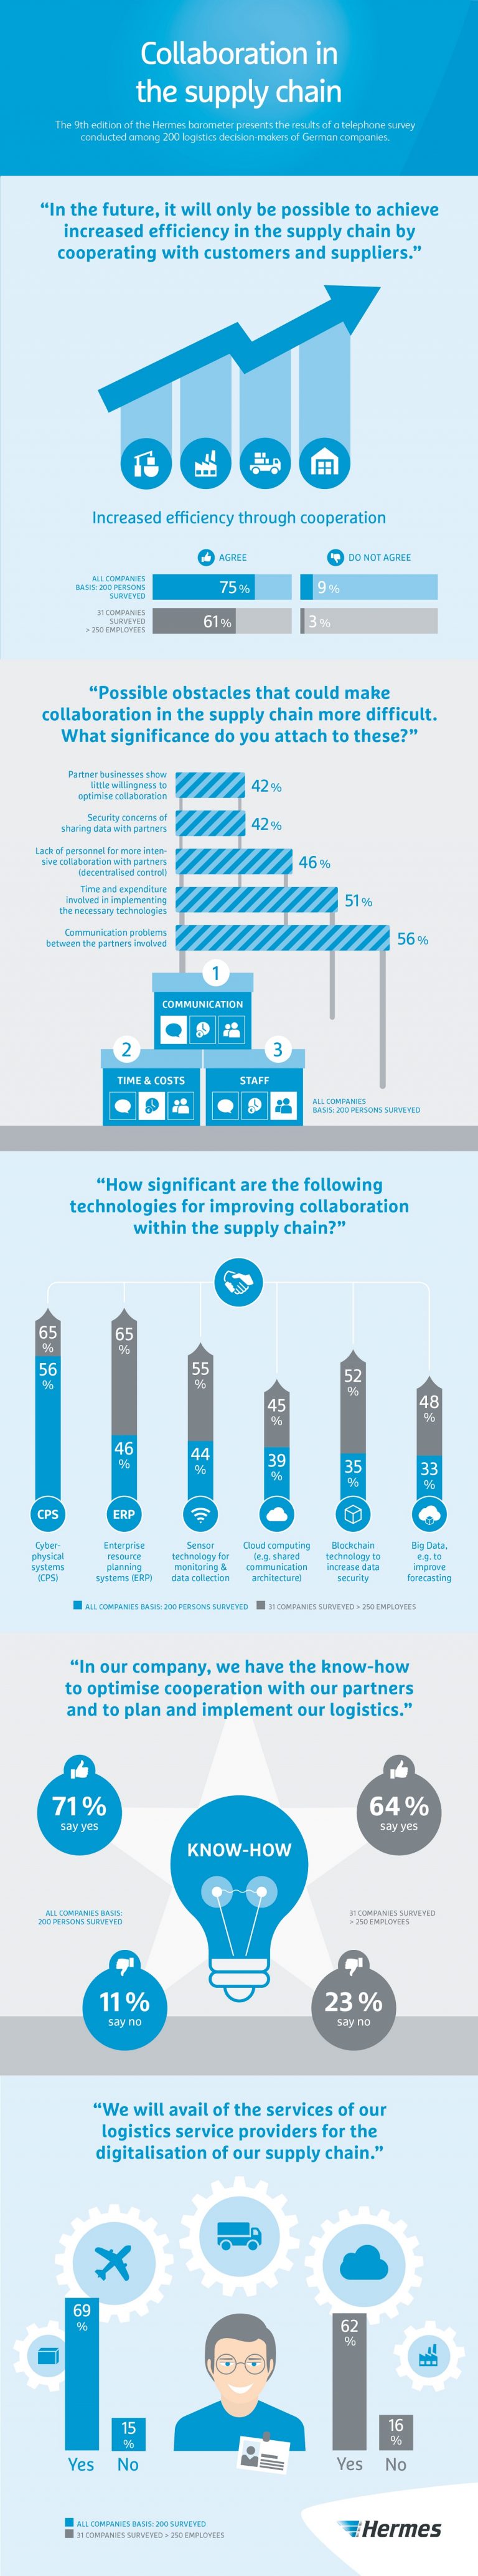 Graphic: Hermes Barometer, Collaboration in the Supply Chain



research, collaboration, cooperation, study